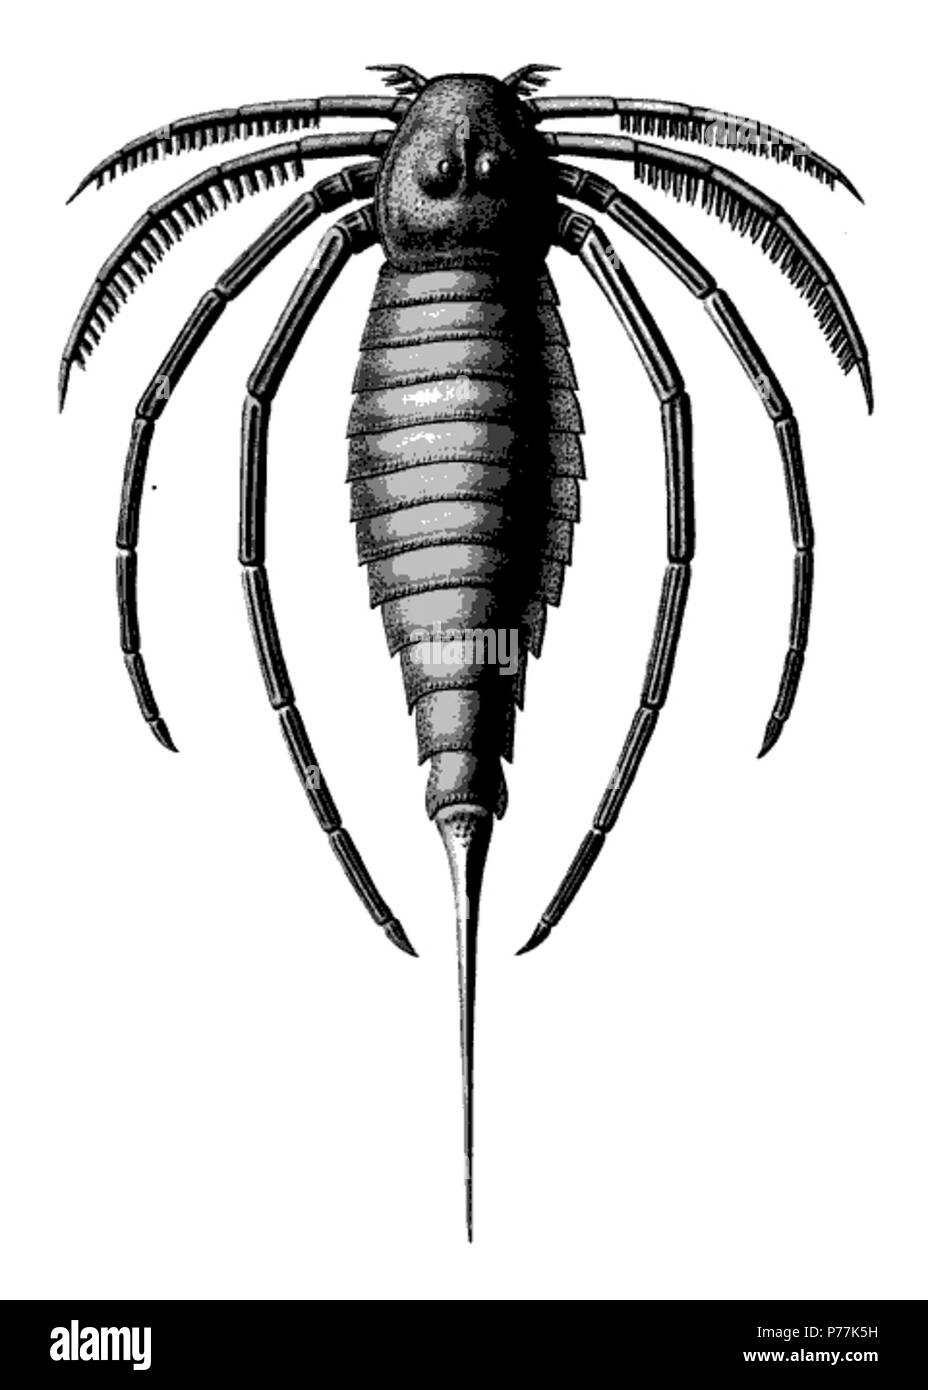 Hallipterus (Stylonurus) excelsior. Restoration of the dorsal aspect. The carapace and the first pair of legs are taken from the two known specimens of the species. The ocular nodes and the visual areas are restored from the evidence of these specimens and from that of the congeners. The second to fifth pairs of legs are restored after S. cestrotus and the abdomen is left as in Beecher's restoration. About one-eighth natural size. The Eurypterida of New York. Volume 2. New York State Museum Memoir 14, plate 47 . 1912 13 The Eurypterida of New York plate 47 Stock Photo